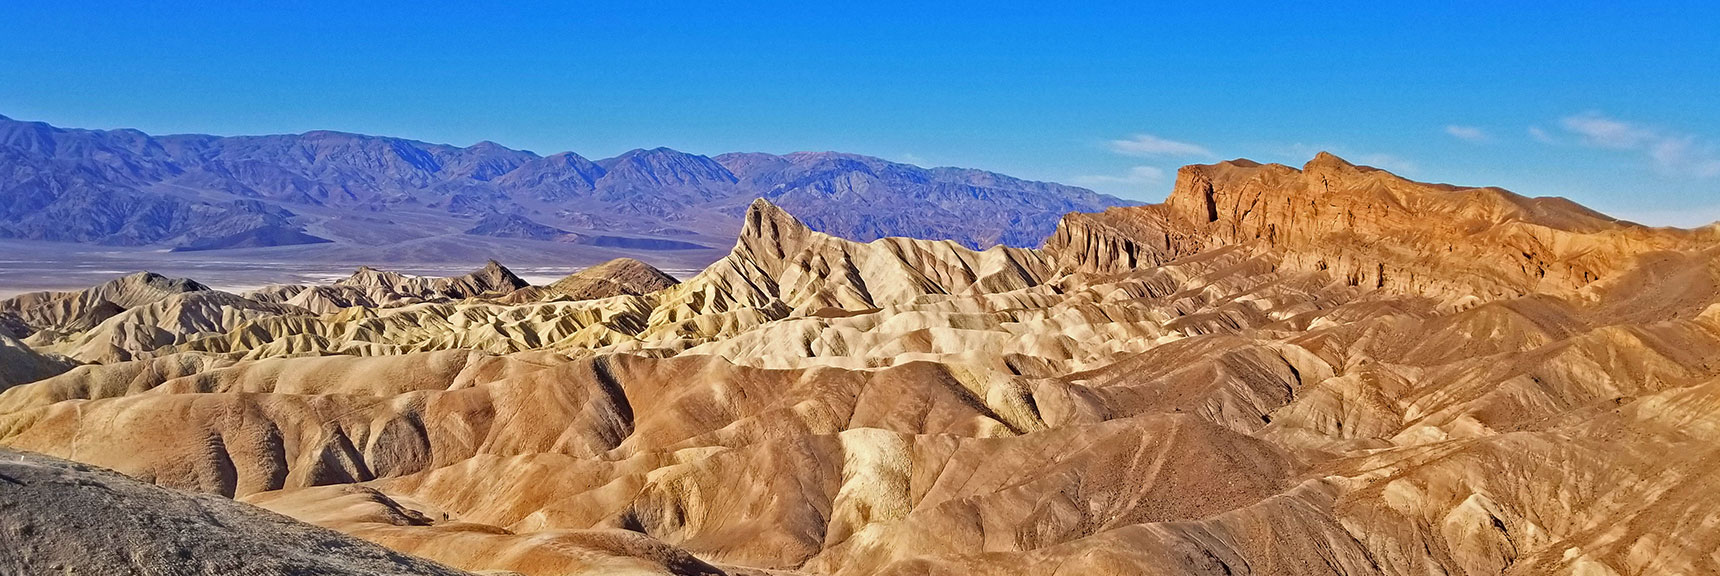 Wider Iconic View of Manly Beacon from Zabriskie Point. | Golden Canyon to Zabriskie Point | Death Valley National Park, California